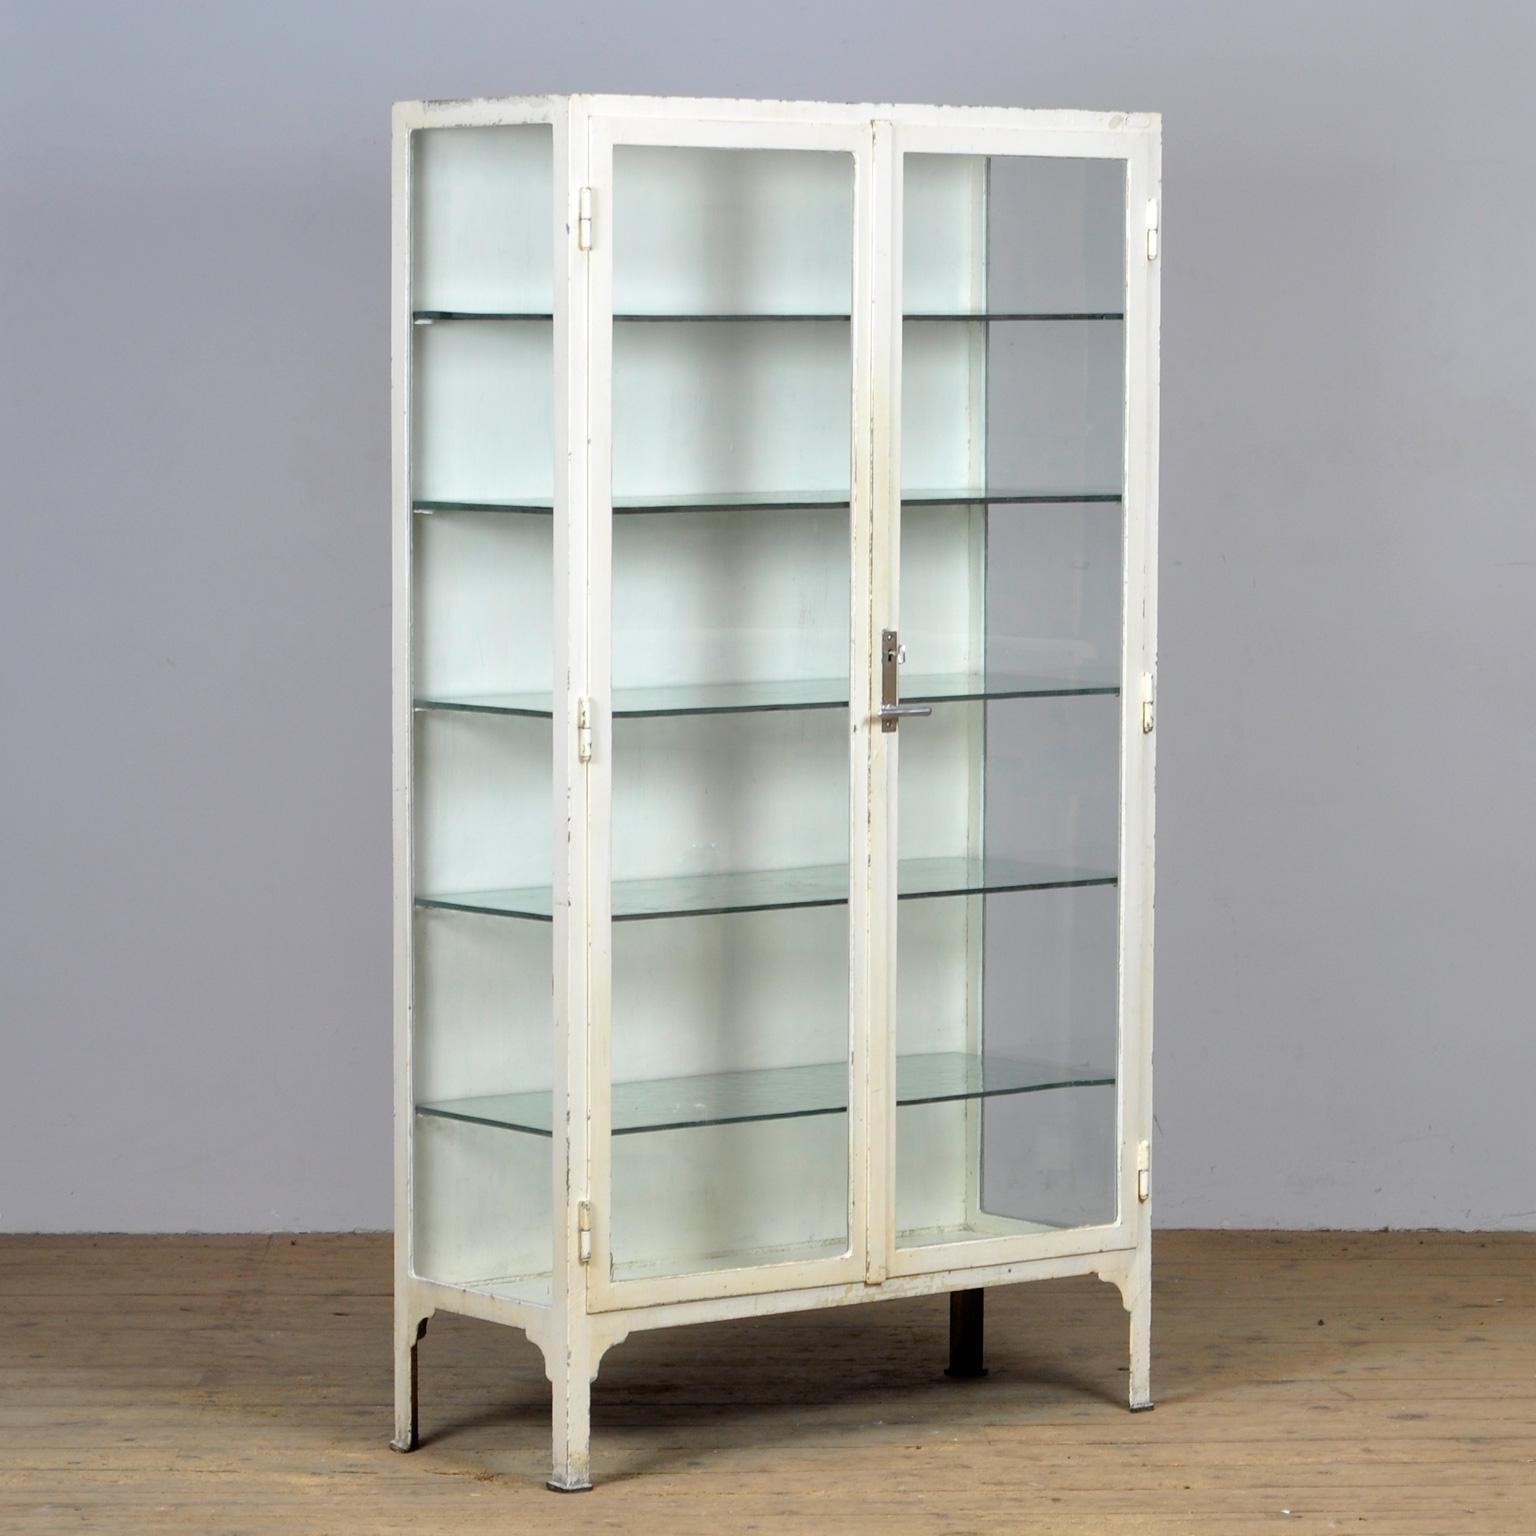 Industrial Iron And Glass Medical Display Cabinet, 1930s For Sale